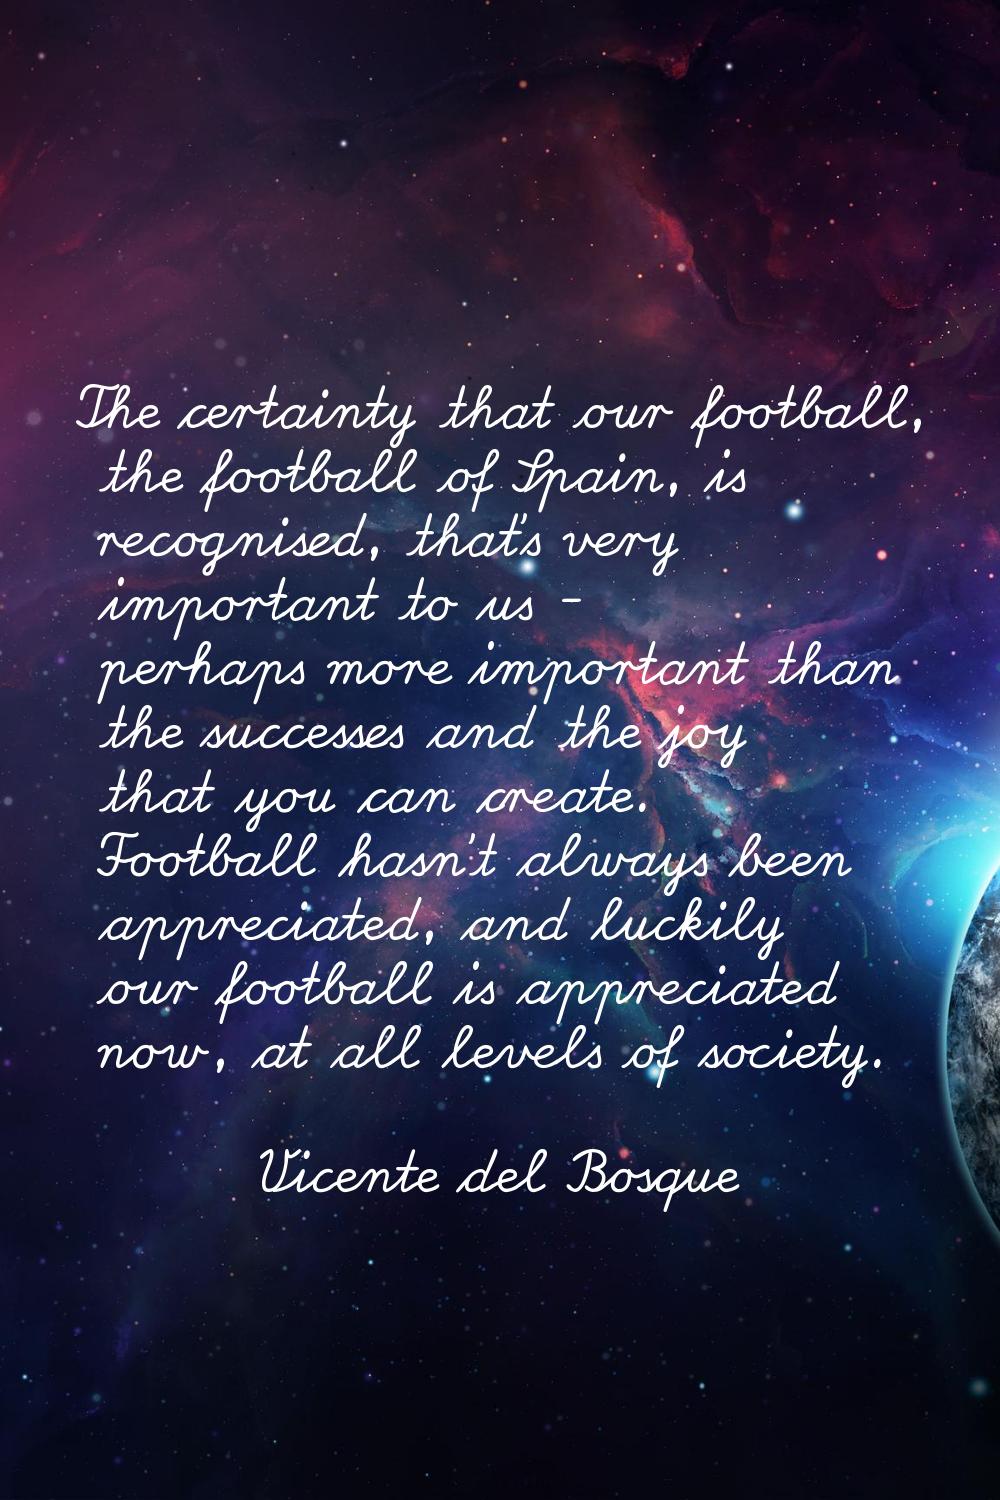 The certainty that our football, the football of Spain, is recognised, that's very important to us 